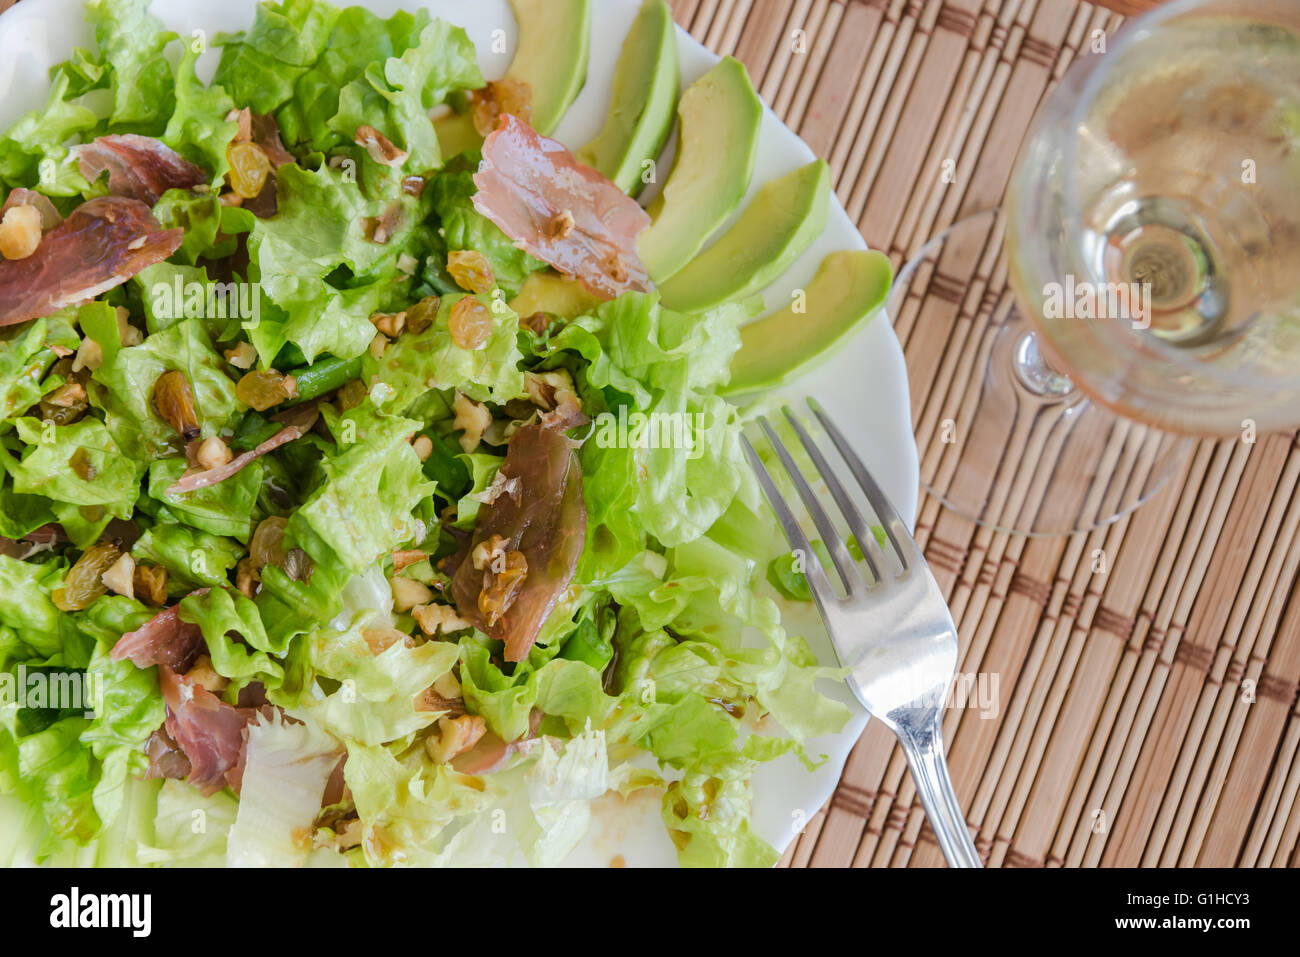 Green mix salad plate with avocado, prosciutto, raisins and pecans over bamboo mat Stock Photo